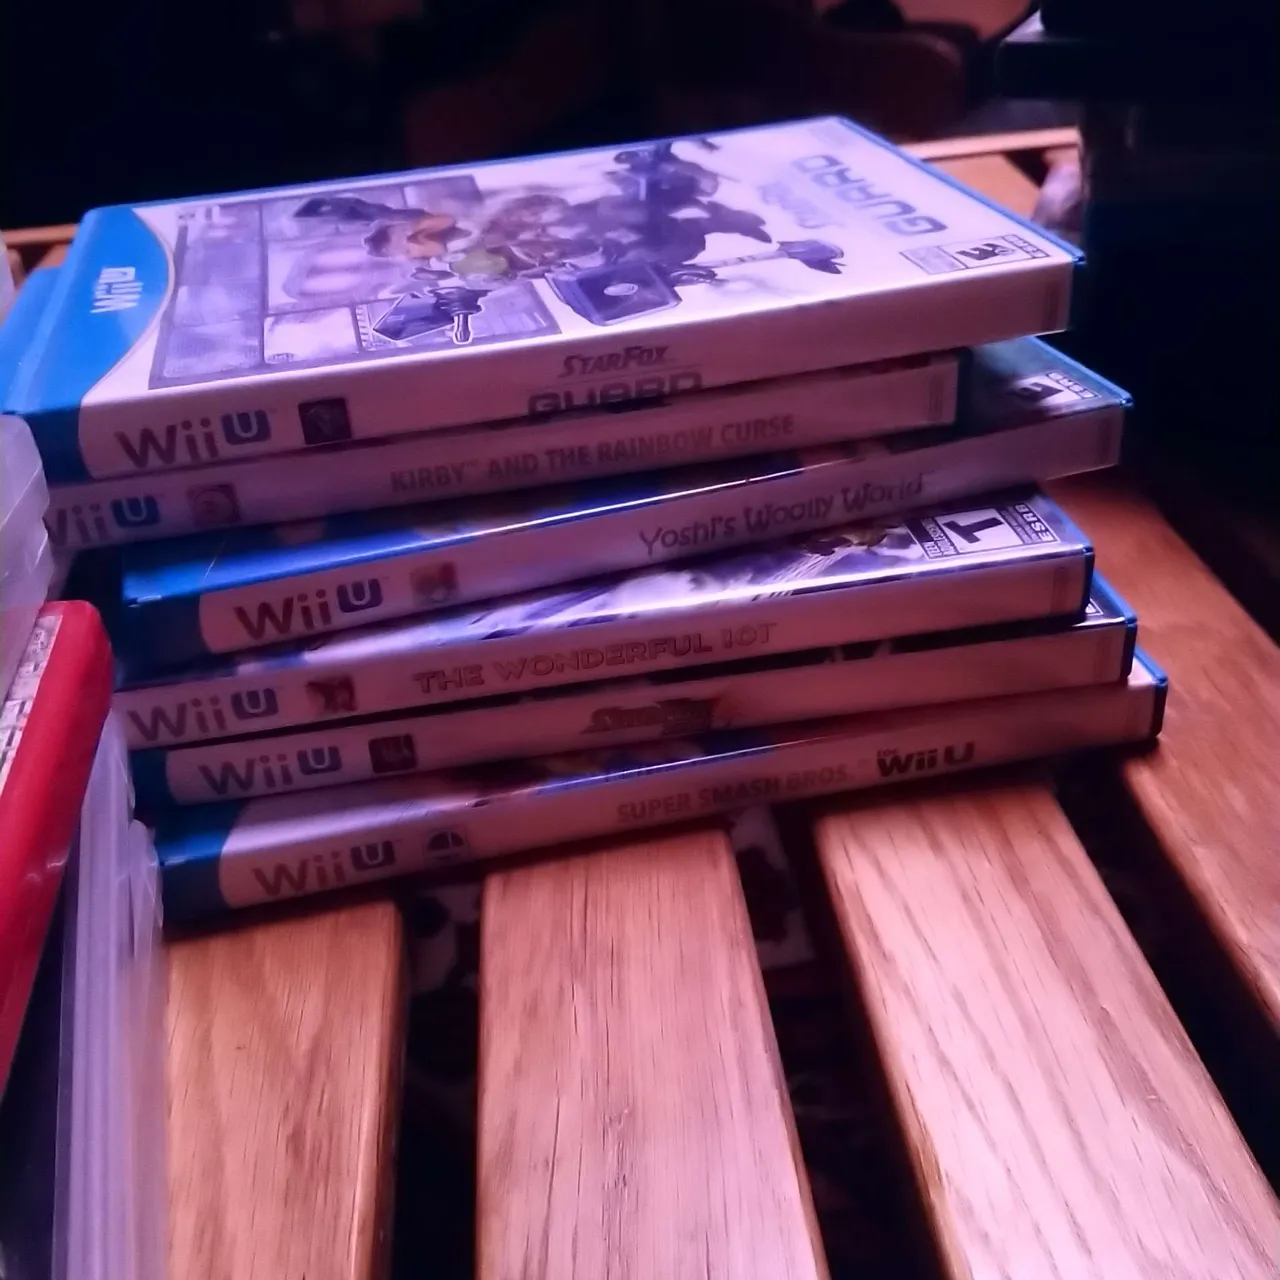 PS2, PS3, GameCube, and Wii U games for sale photo 3